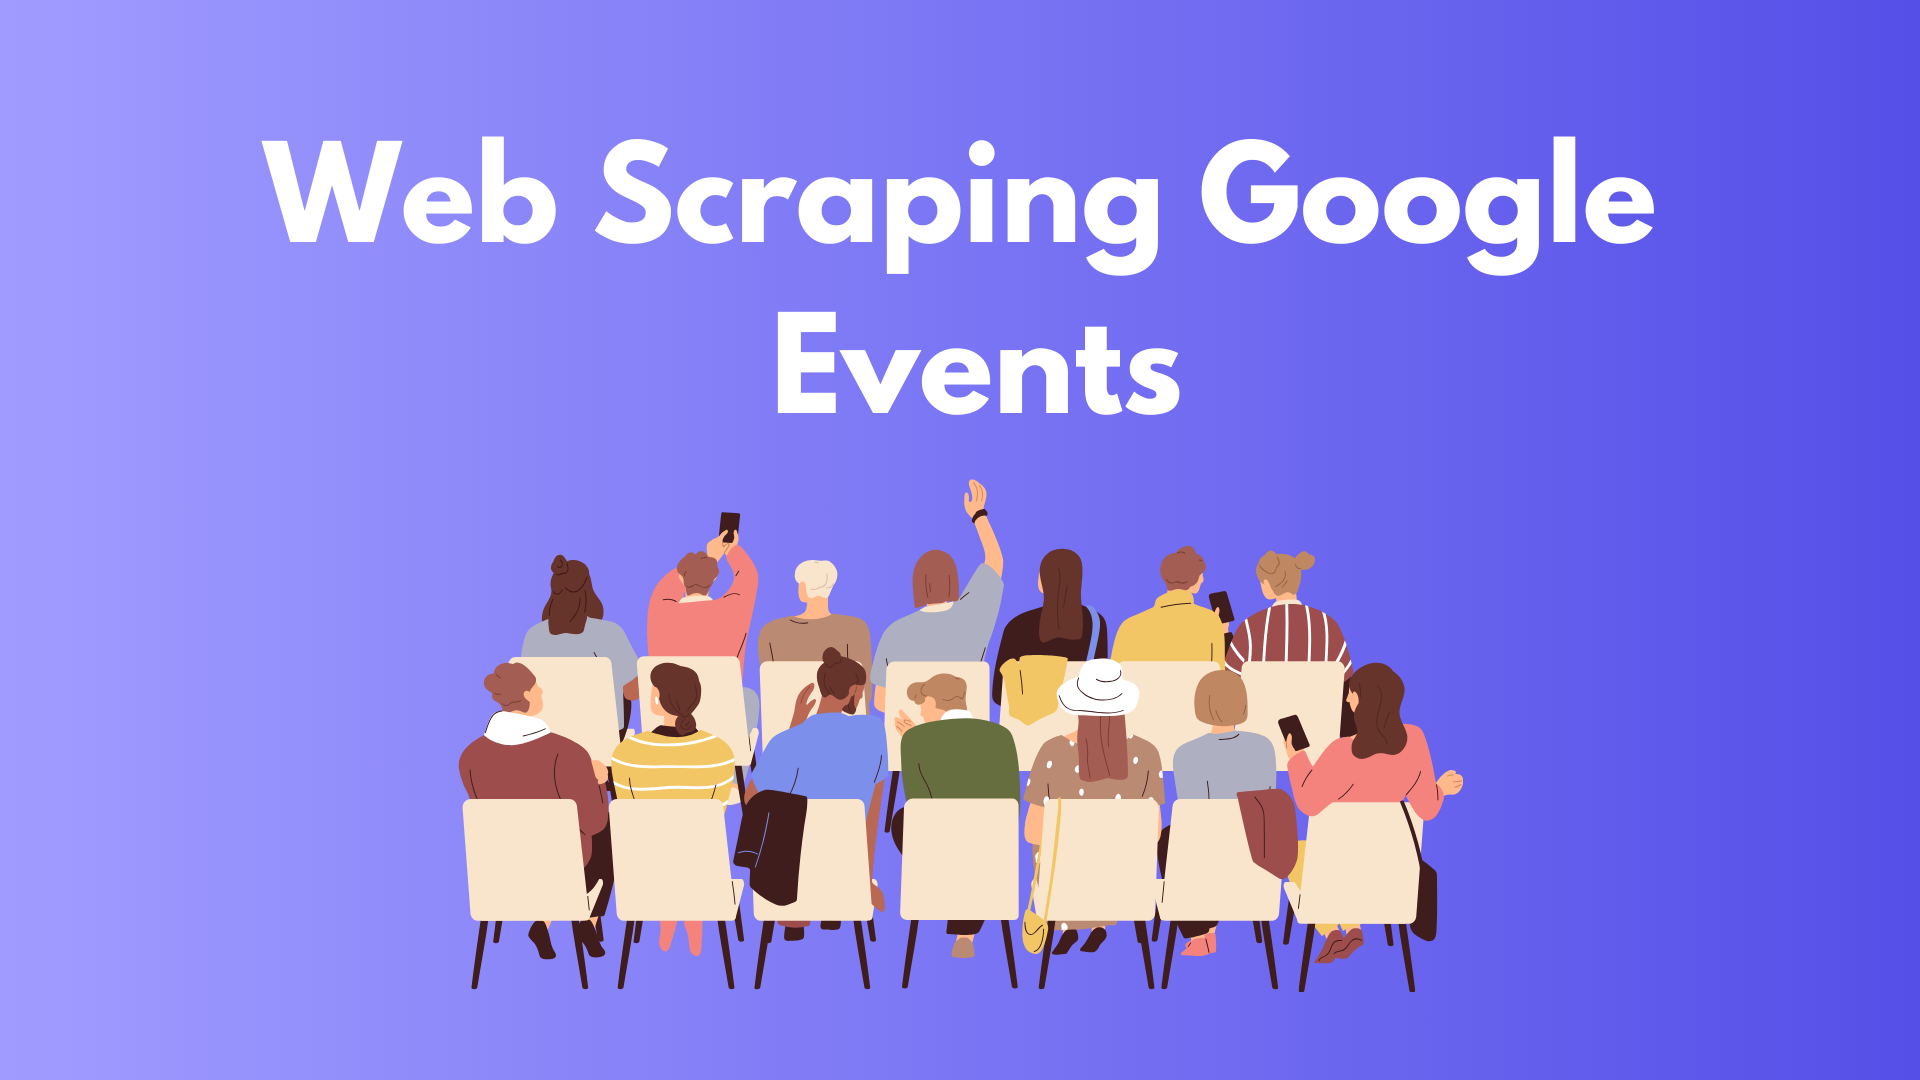 Web Scraping Google Events Results